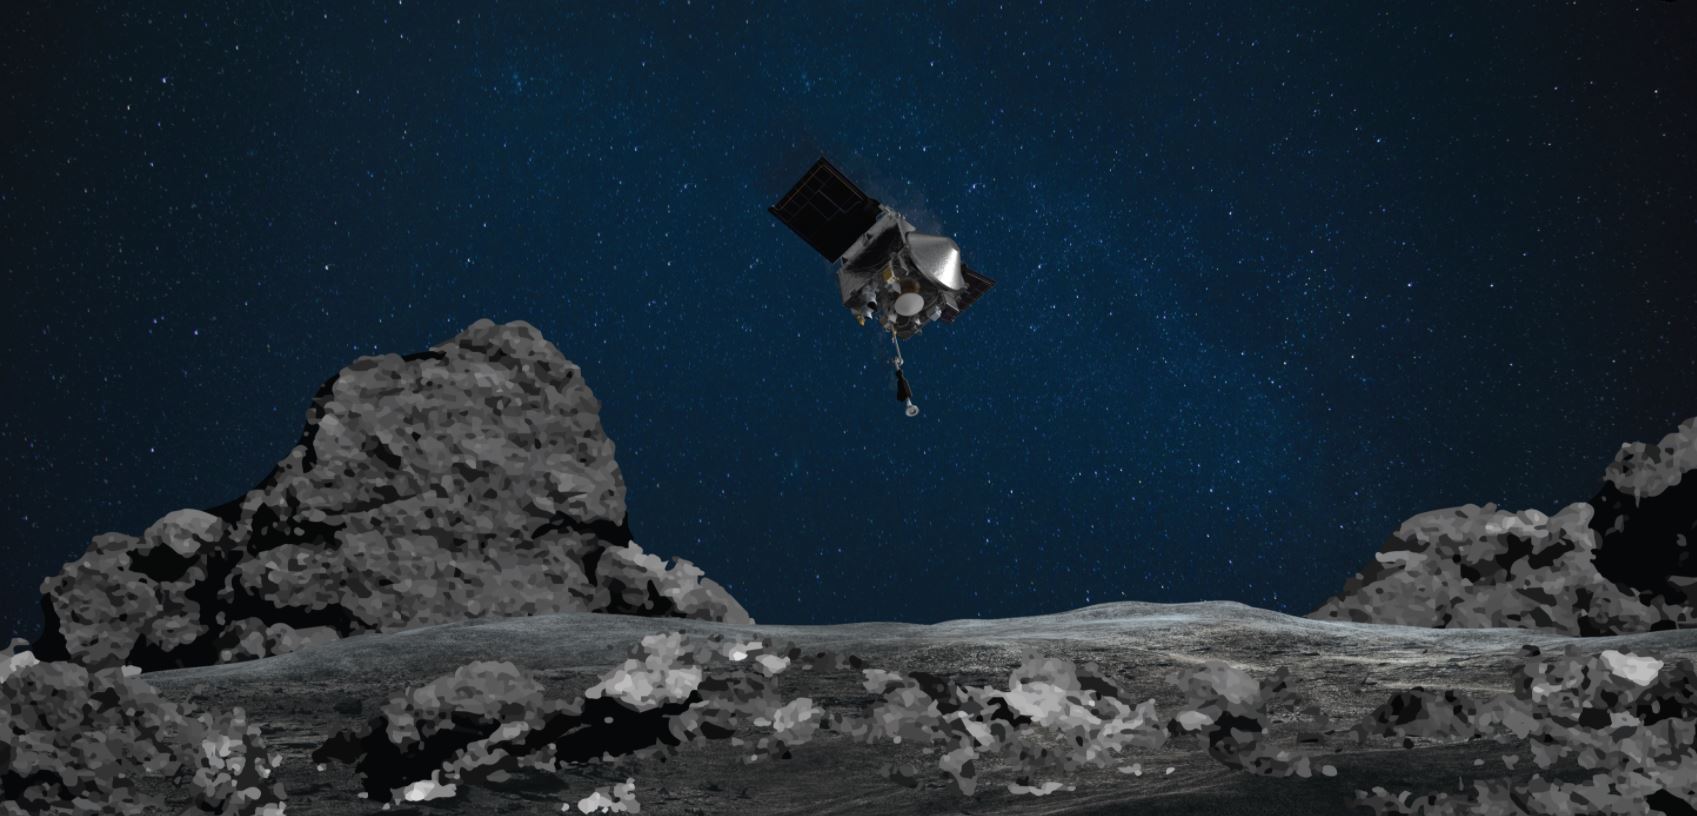 NASA prepares to collect asteroid samples next week on the Deep Space Osiris-Rex mission

